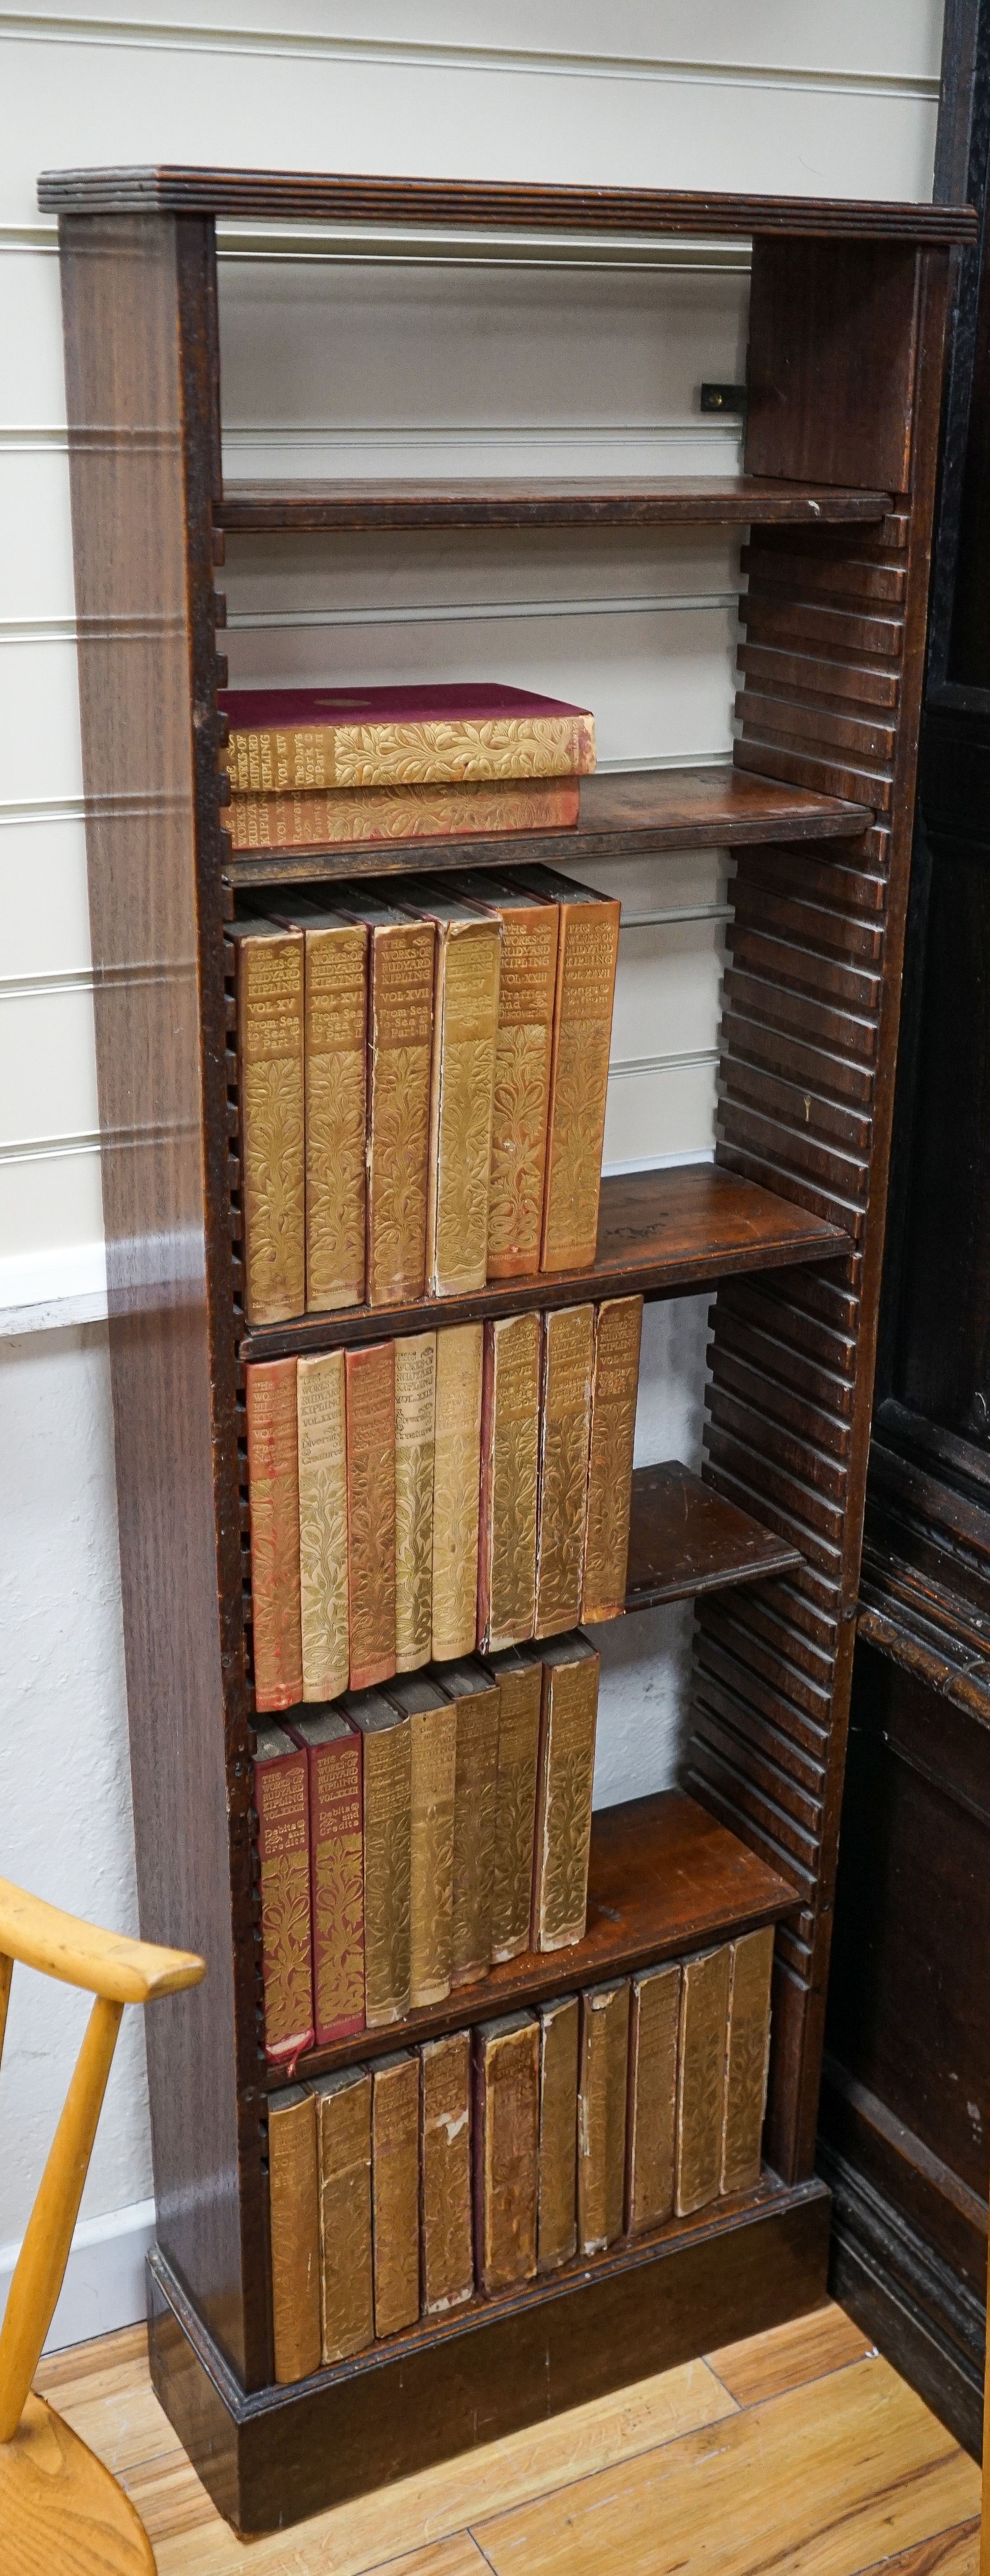 A Georgian mahogany wall-mounted narrow bookshelf, width 48cm, depth 18cm, height 147cm, containing a limited edition Works of Rudyard Kipling in 33 volumes, published 1900